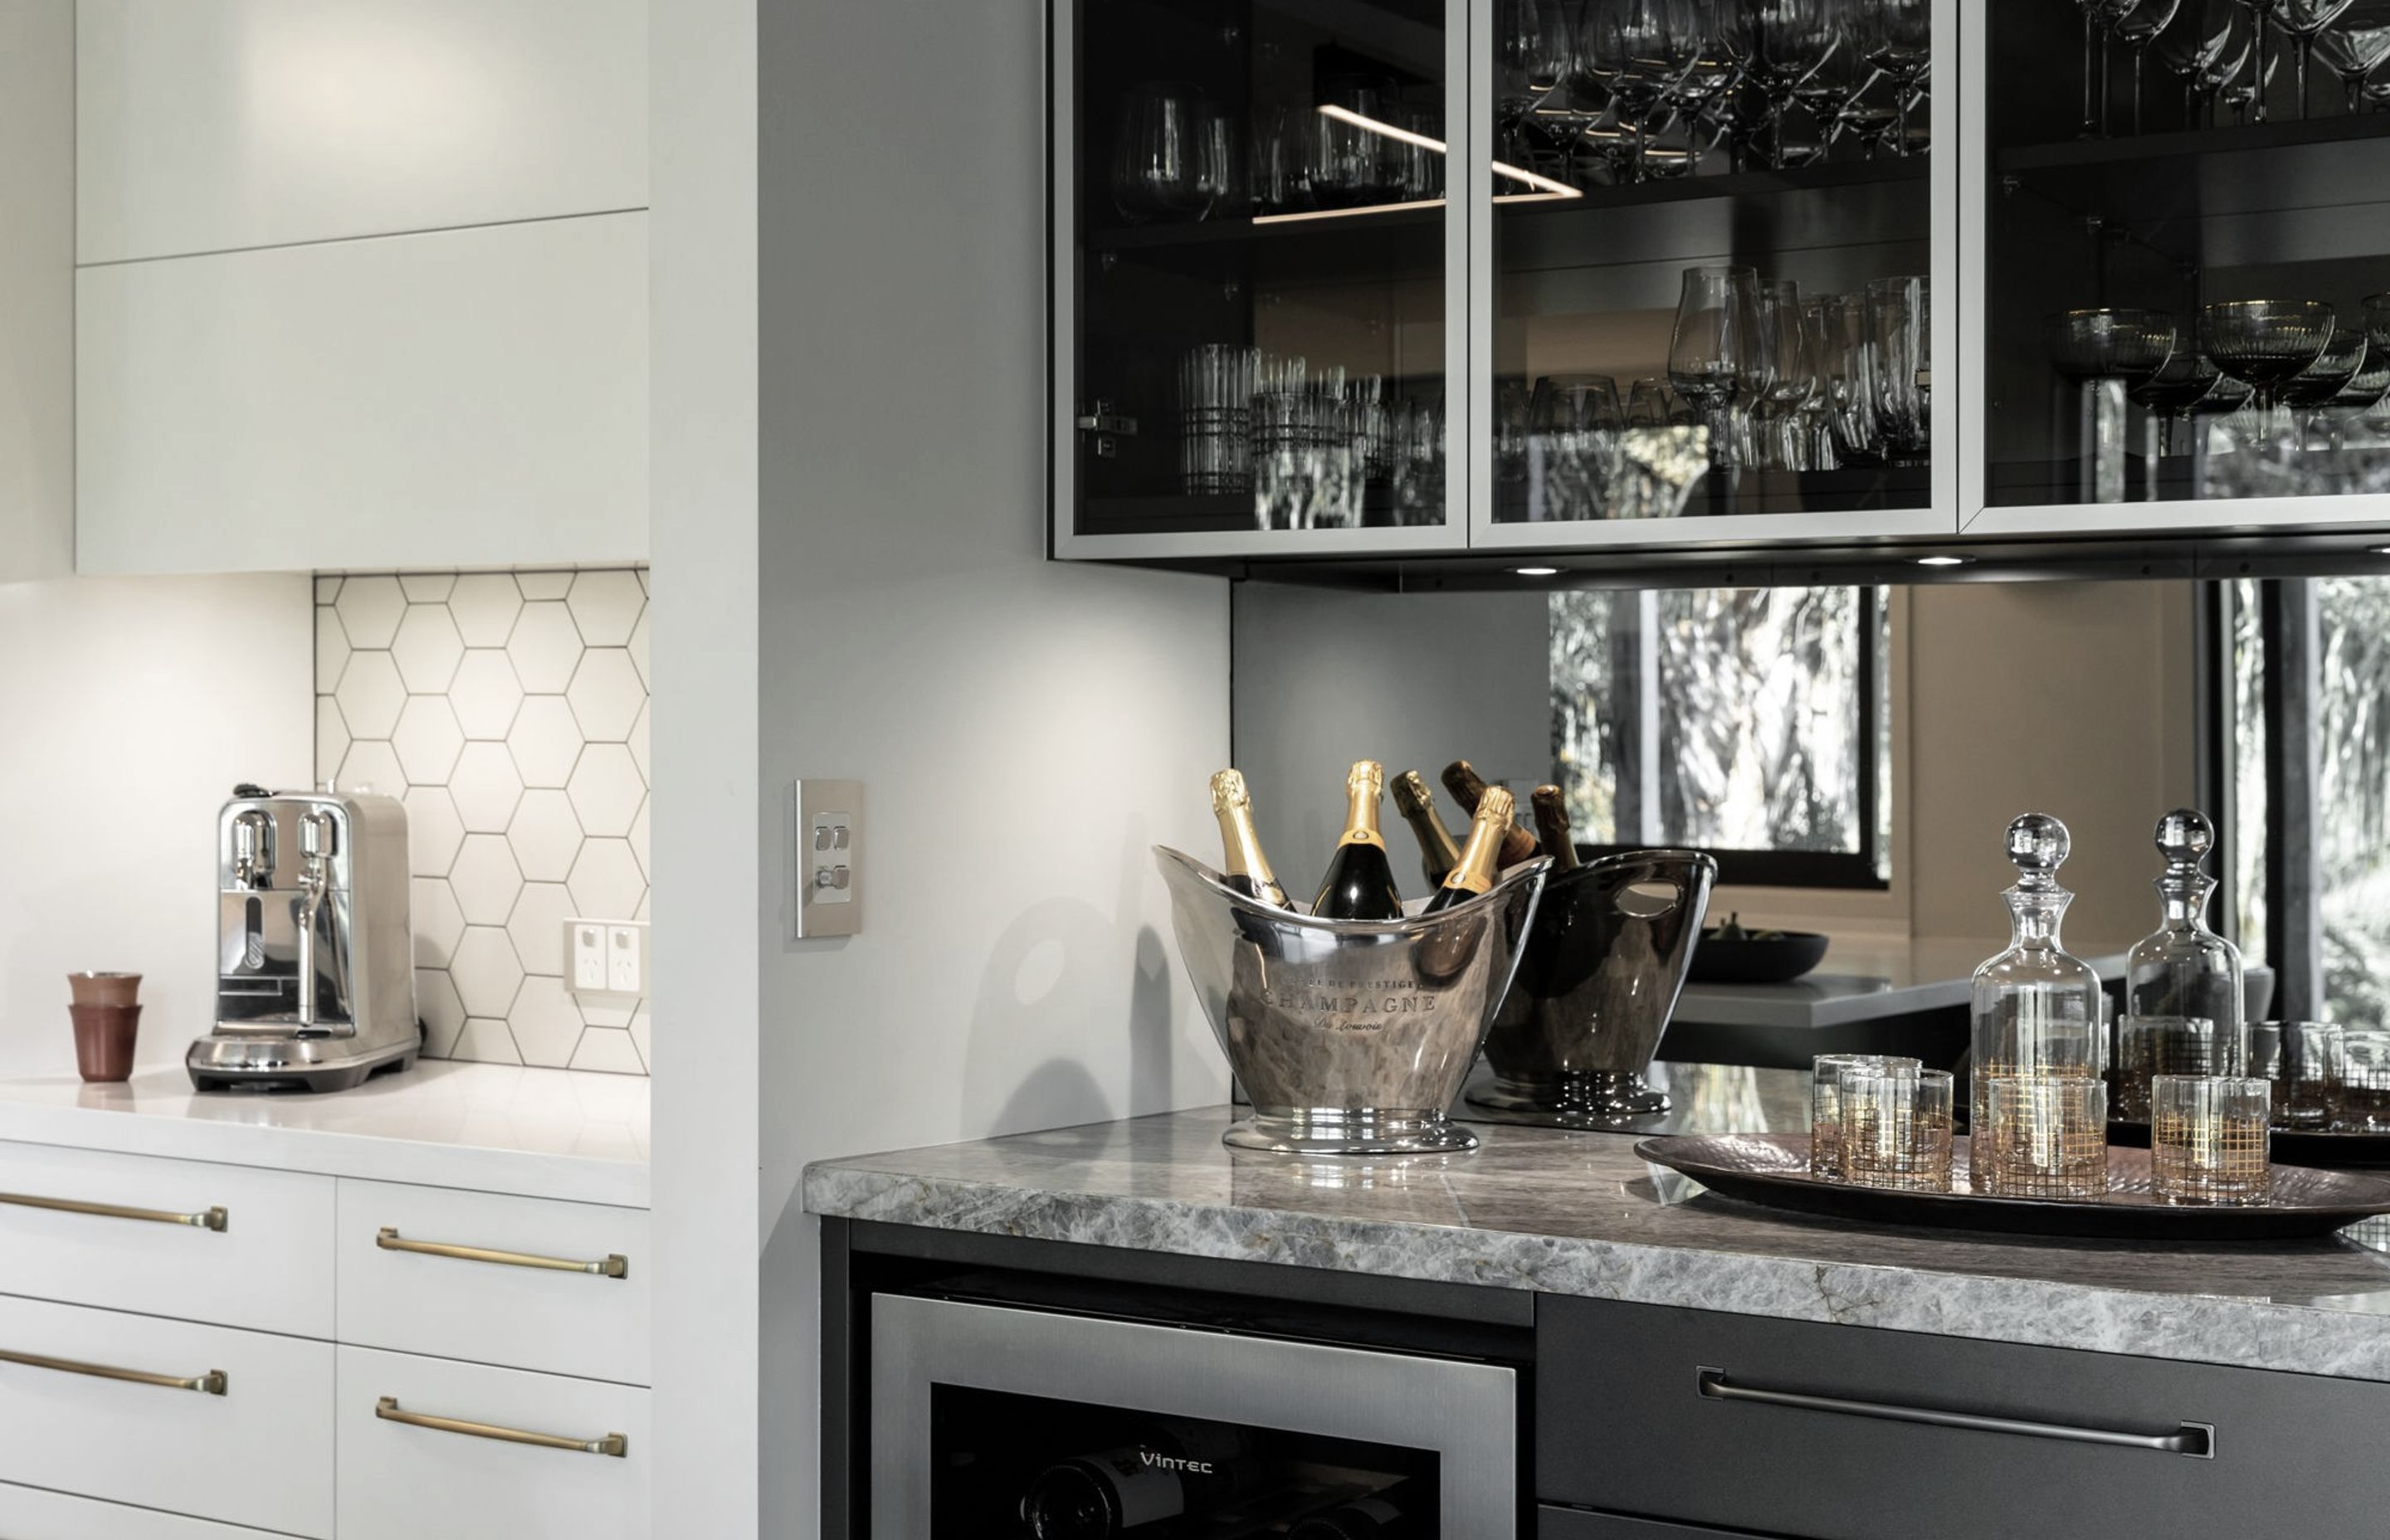 A coffee and drinks zone were added for clients who like to entertain. The bar includes a drinks fridge and plenty of space for their wine glasses collection. This extends and enhances the kitchen space and allows guests to feel connected pouring drinks y